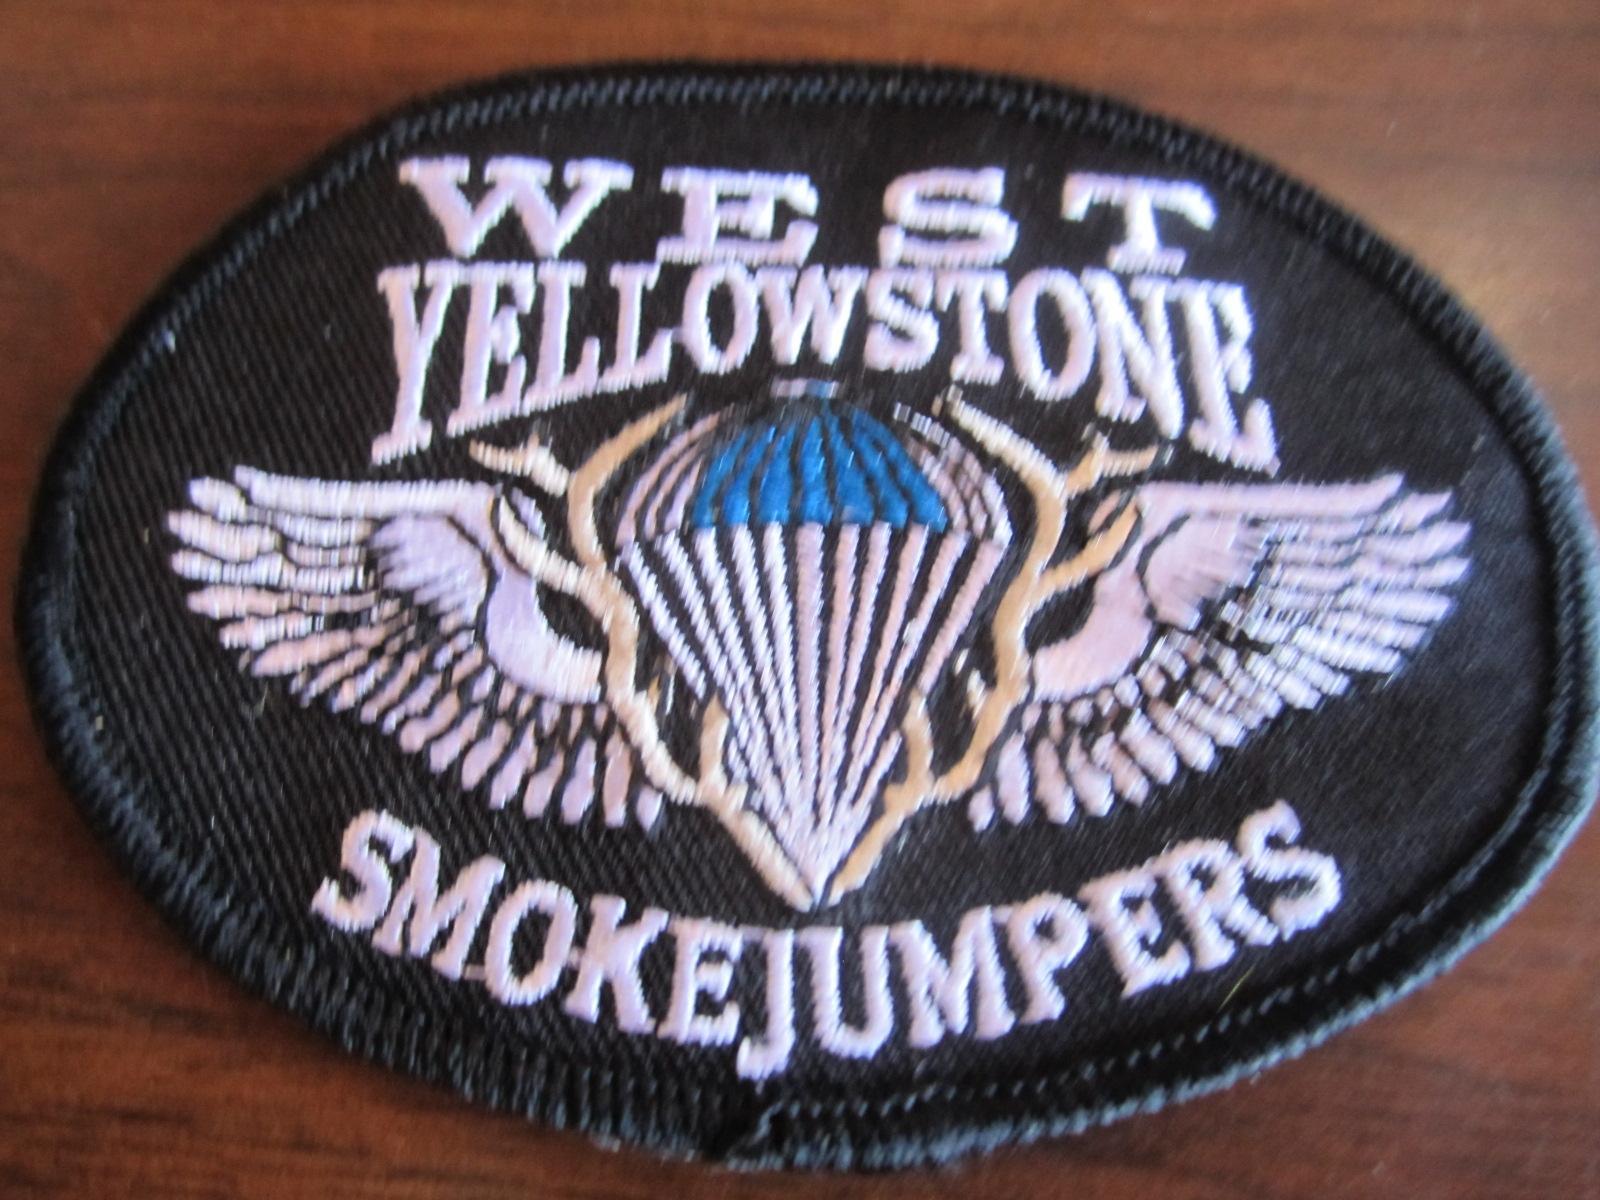 Posted by West Yellowstone Smokejumpers